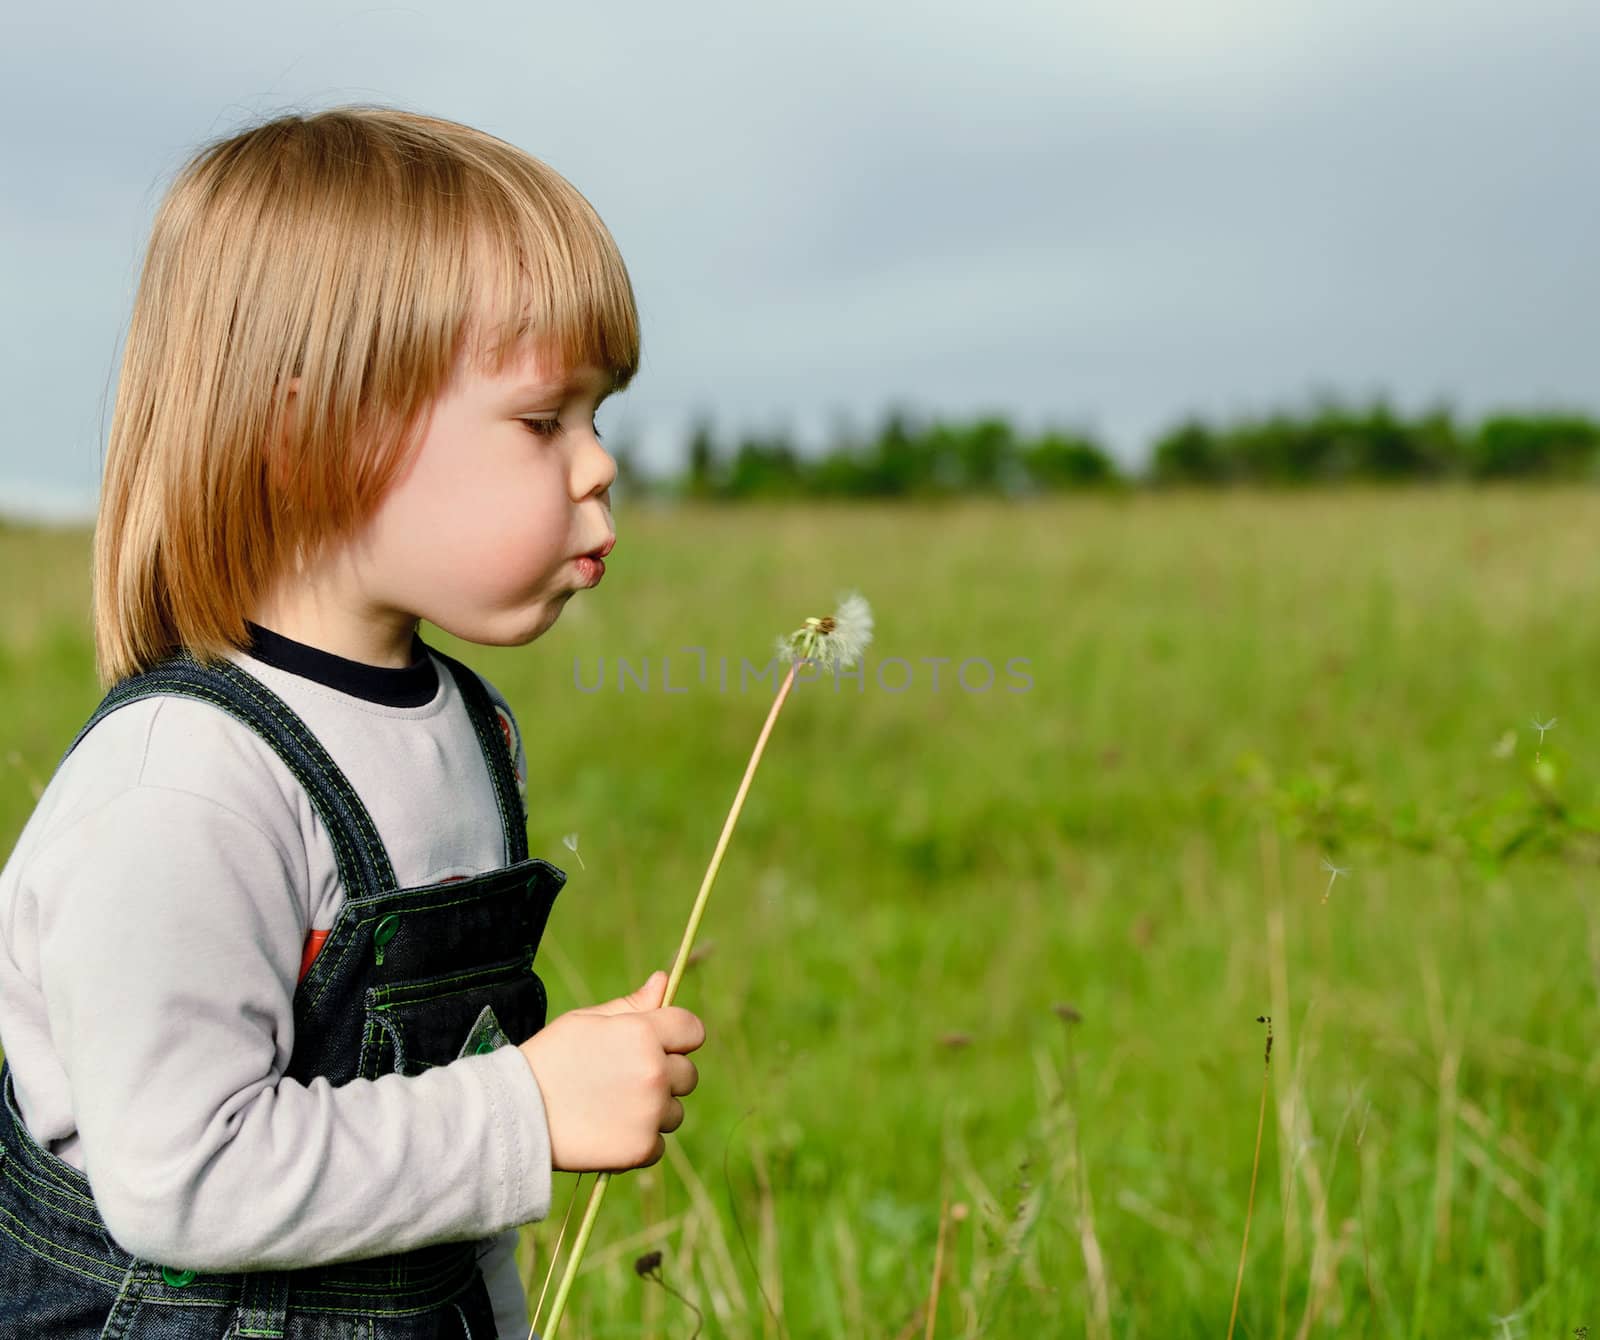 The boy and a dandelion